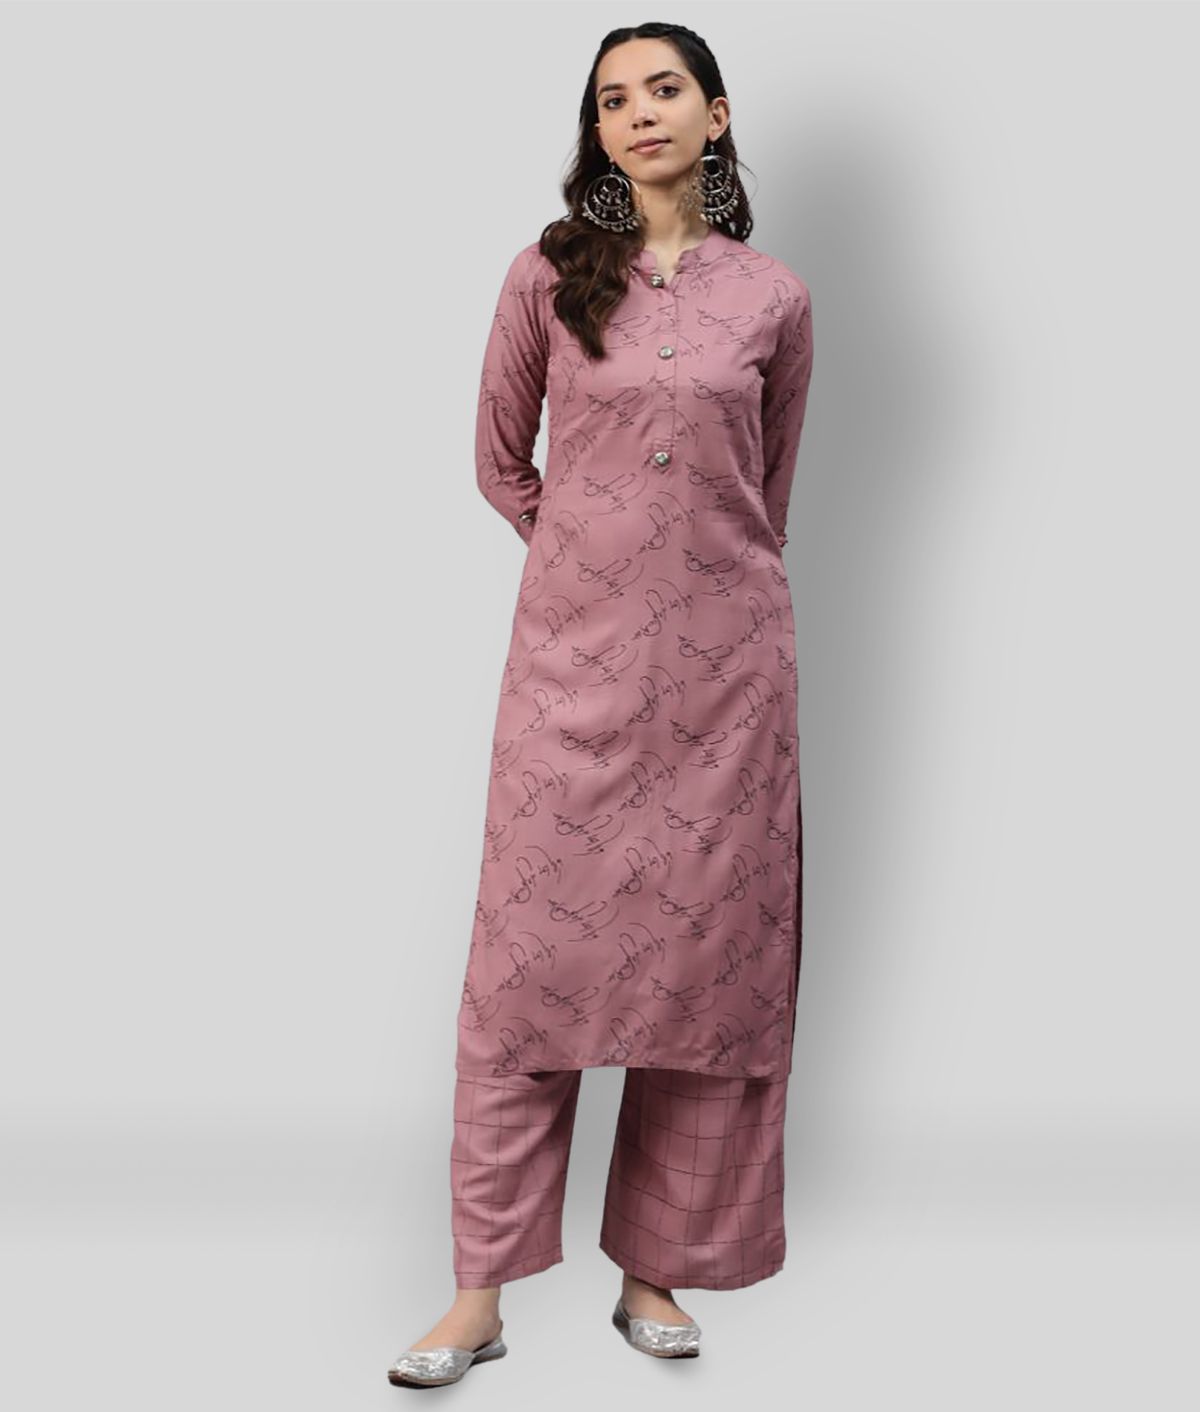     			JC4U - Violet Straight Rayon Women's Stitched Salwar Suit ( Pack of 1 )